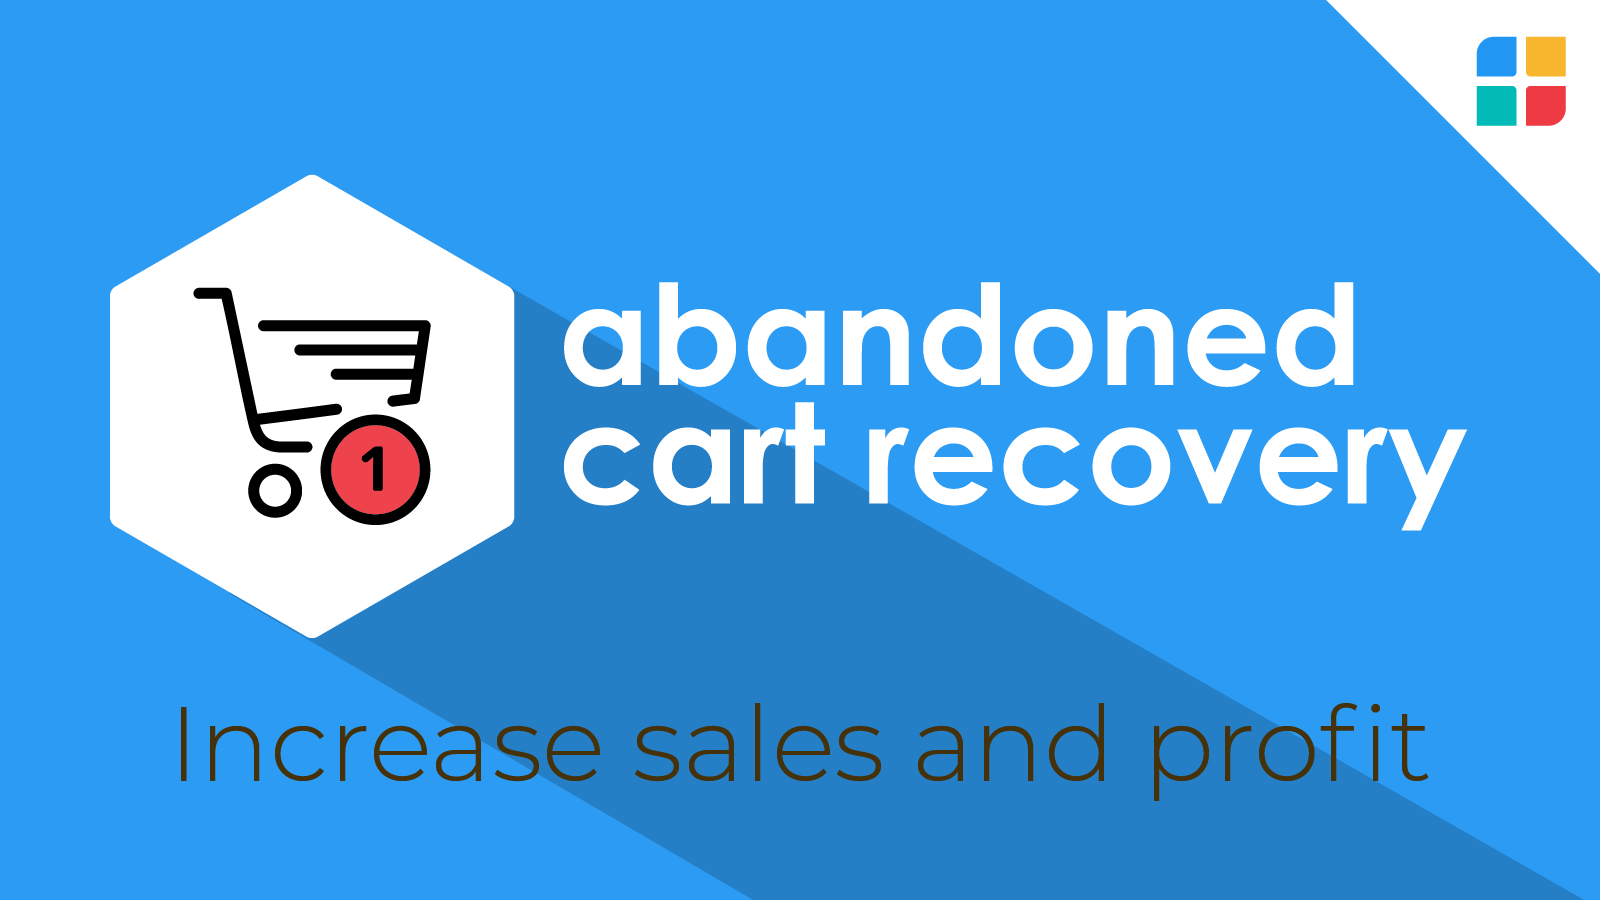 Automatically convert abandoned shopping carts into orders